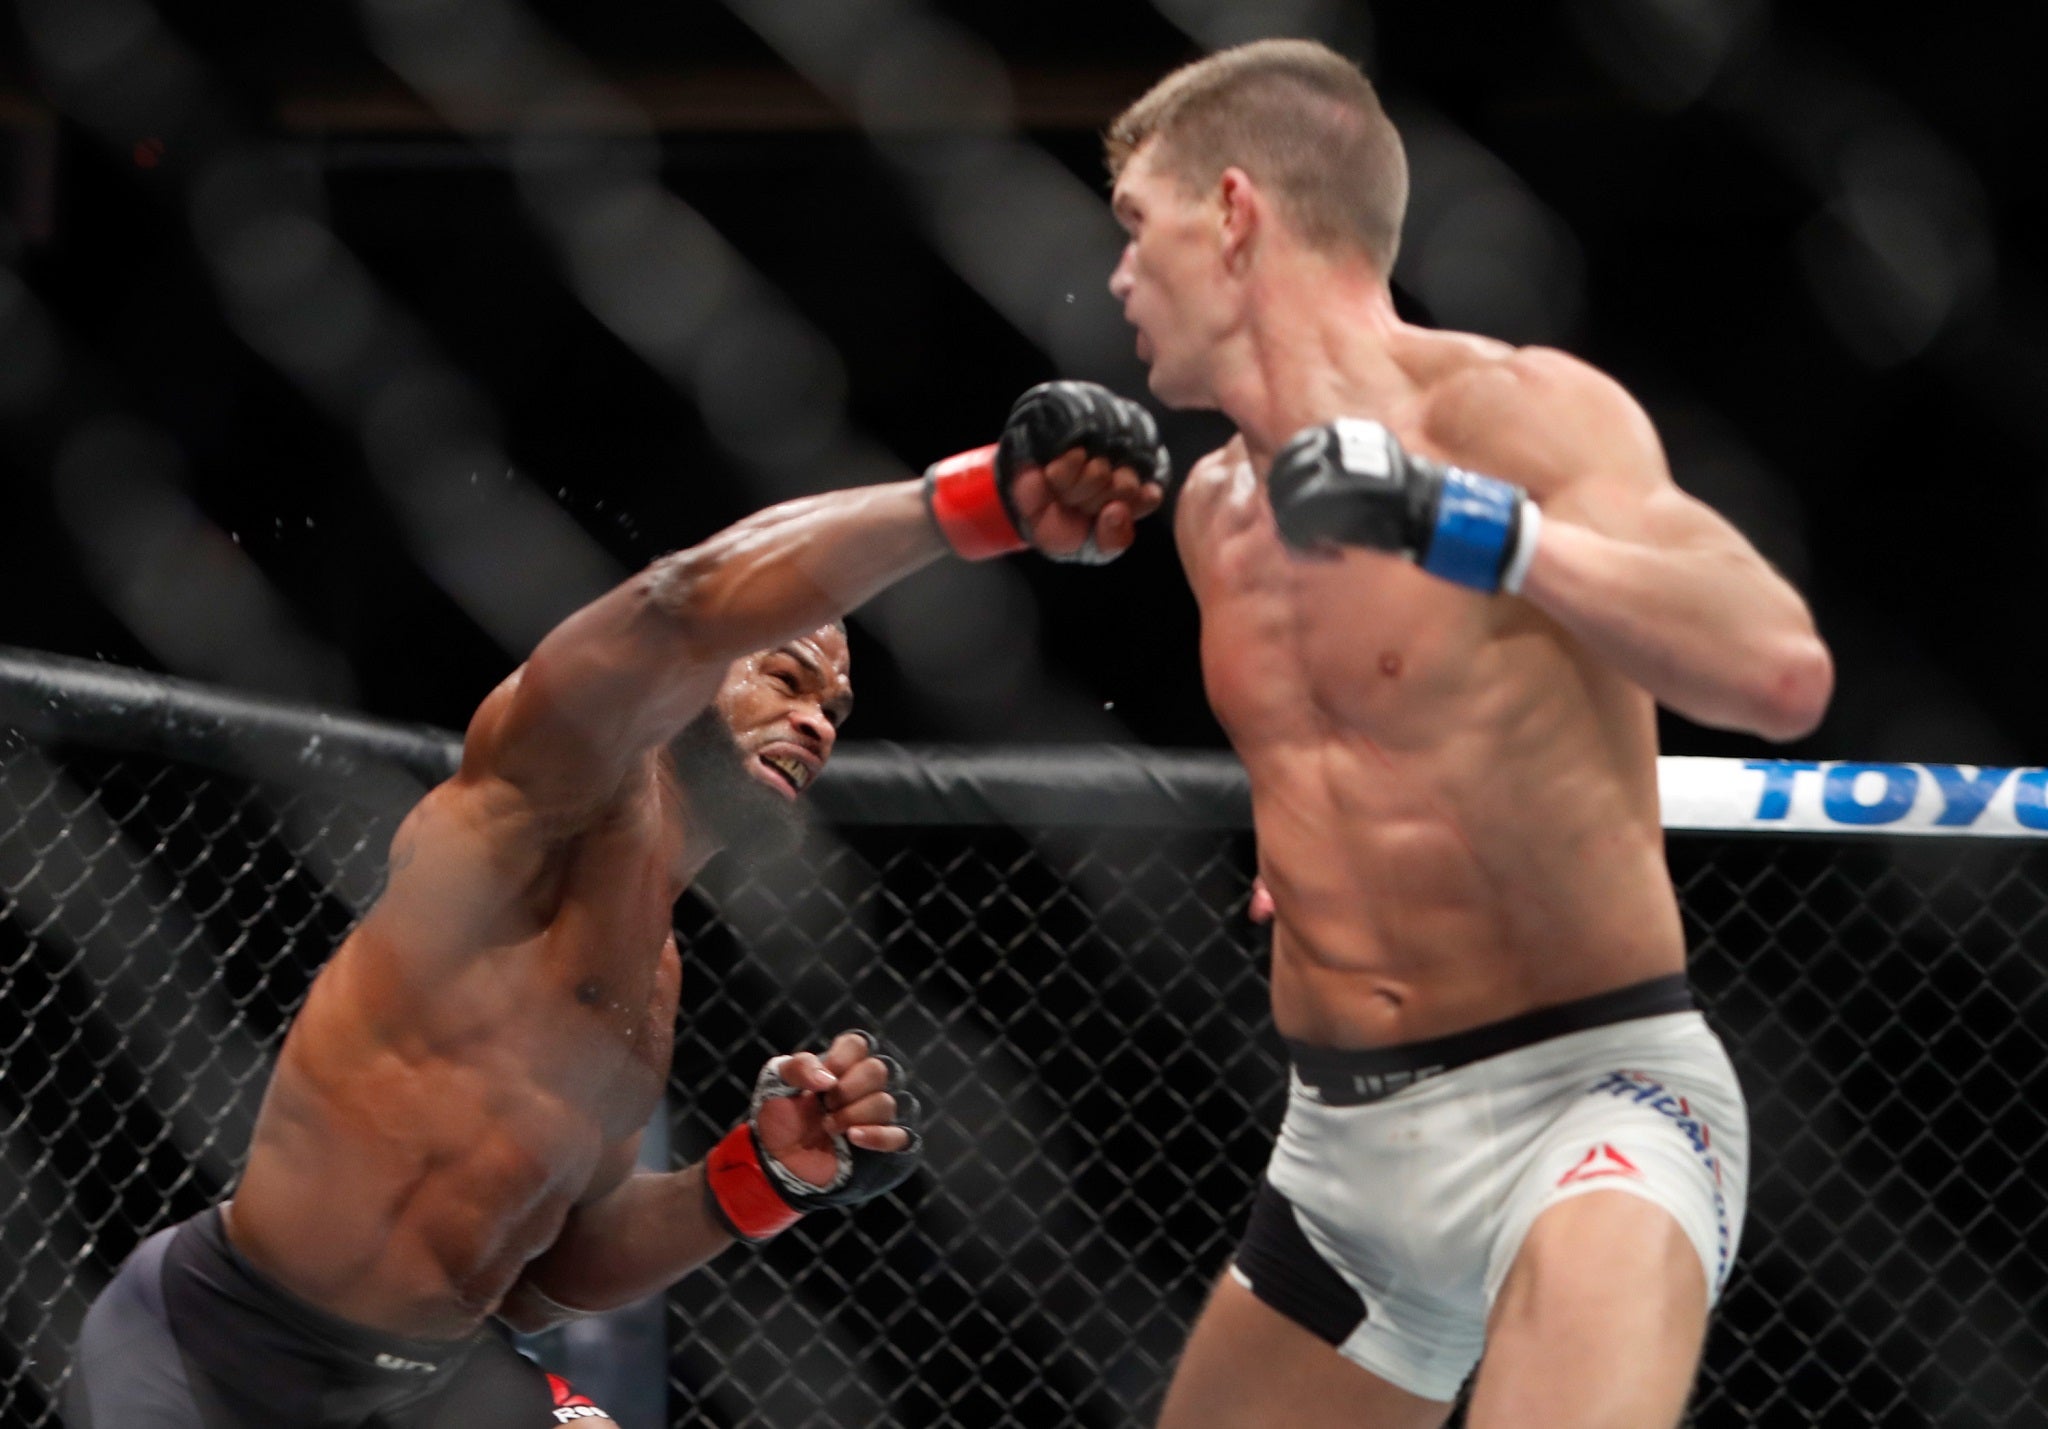 Tyron Woodley retained his UFC welterweight title against Stephen 'Wonderboy' Thompson